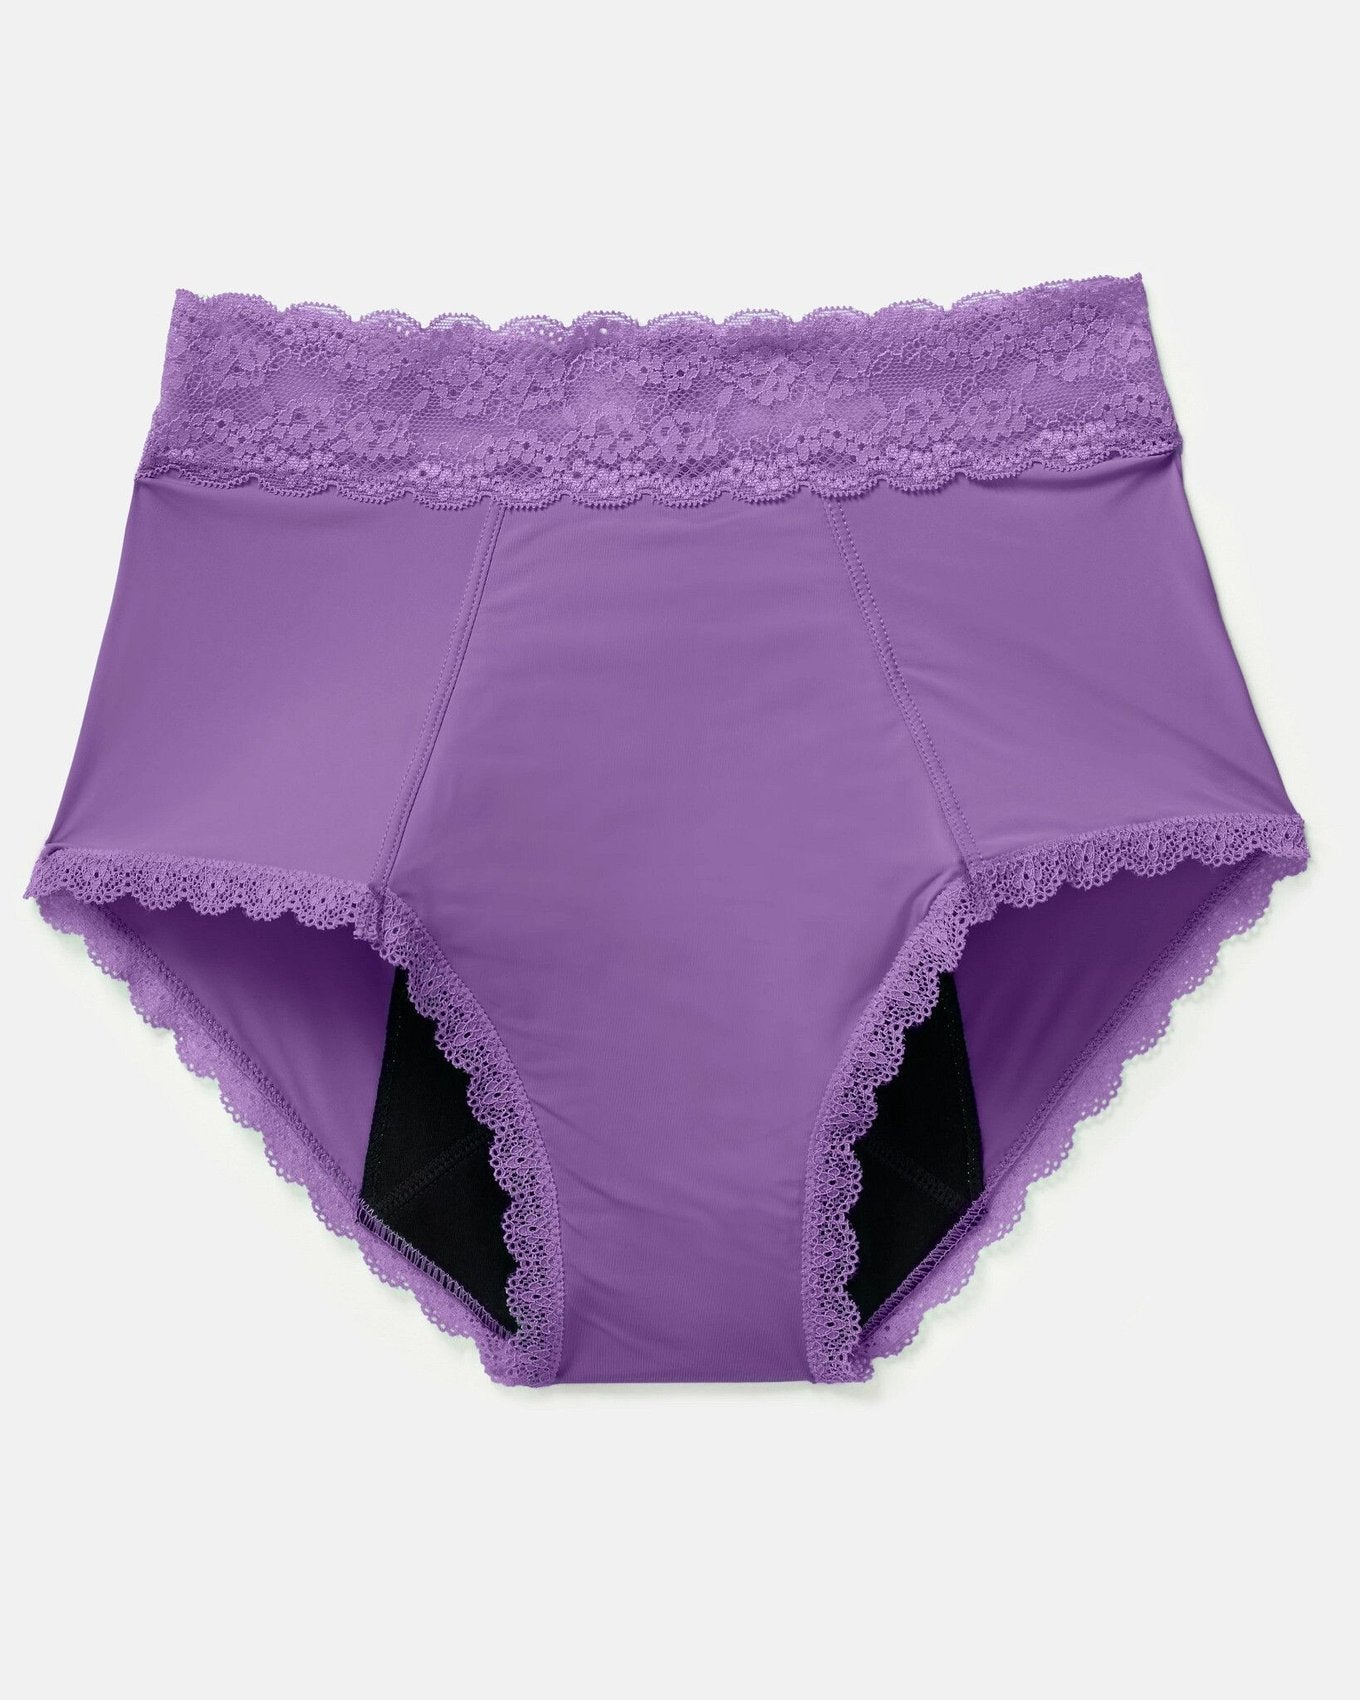 Joyja Amelia period-proof panty in color Amethyst Orchid and shape high waisted